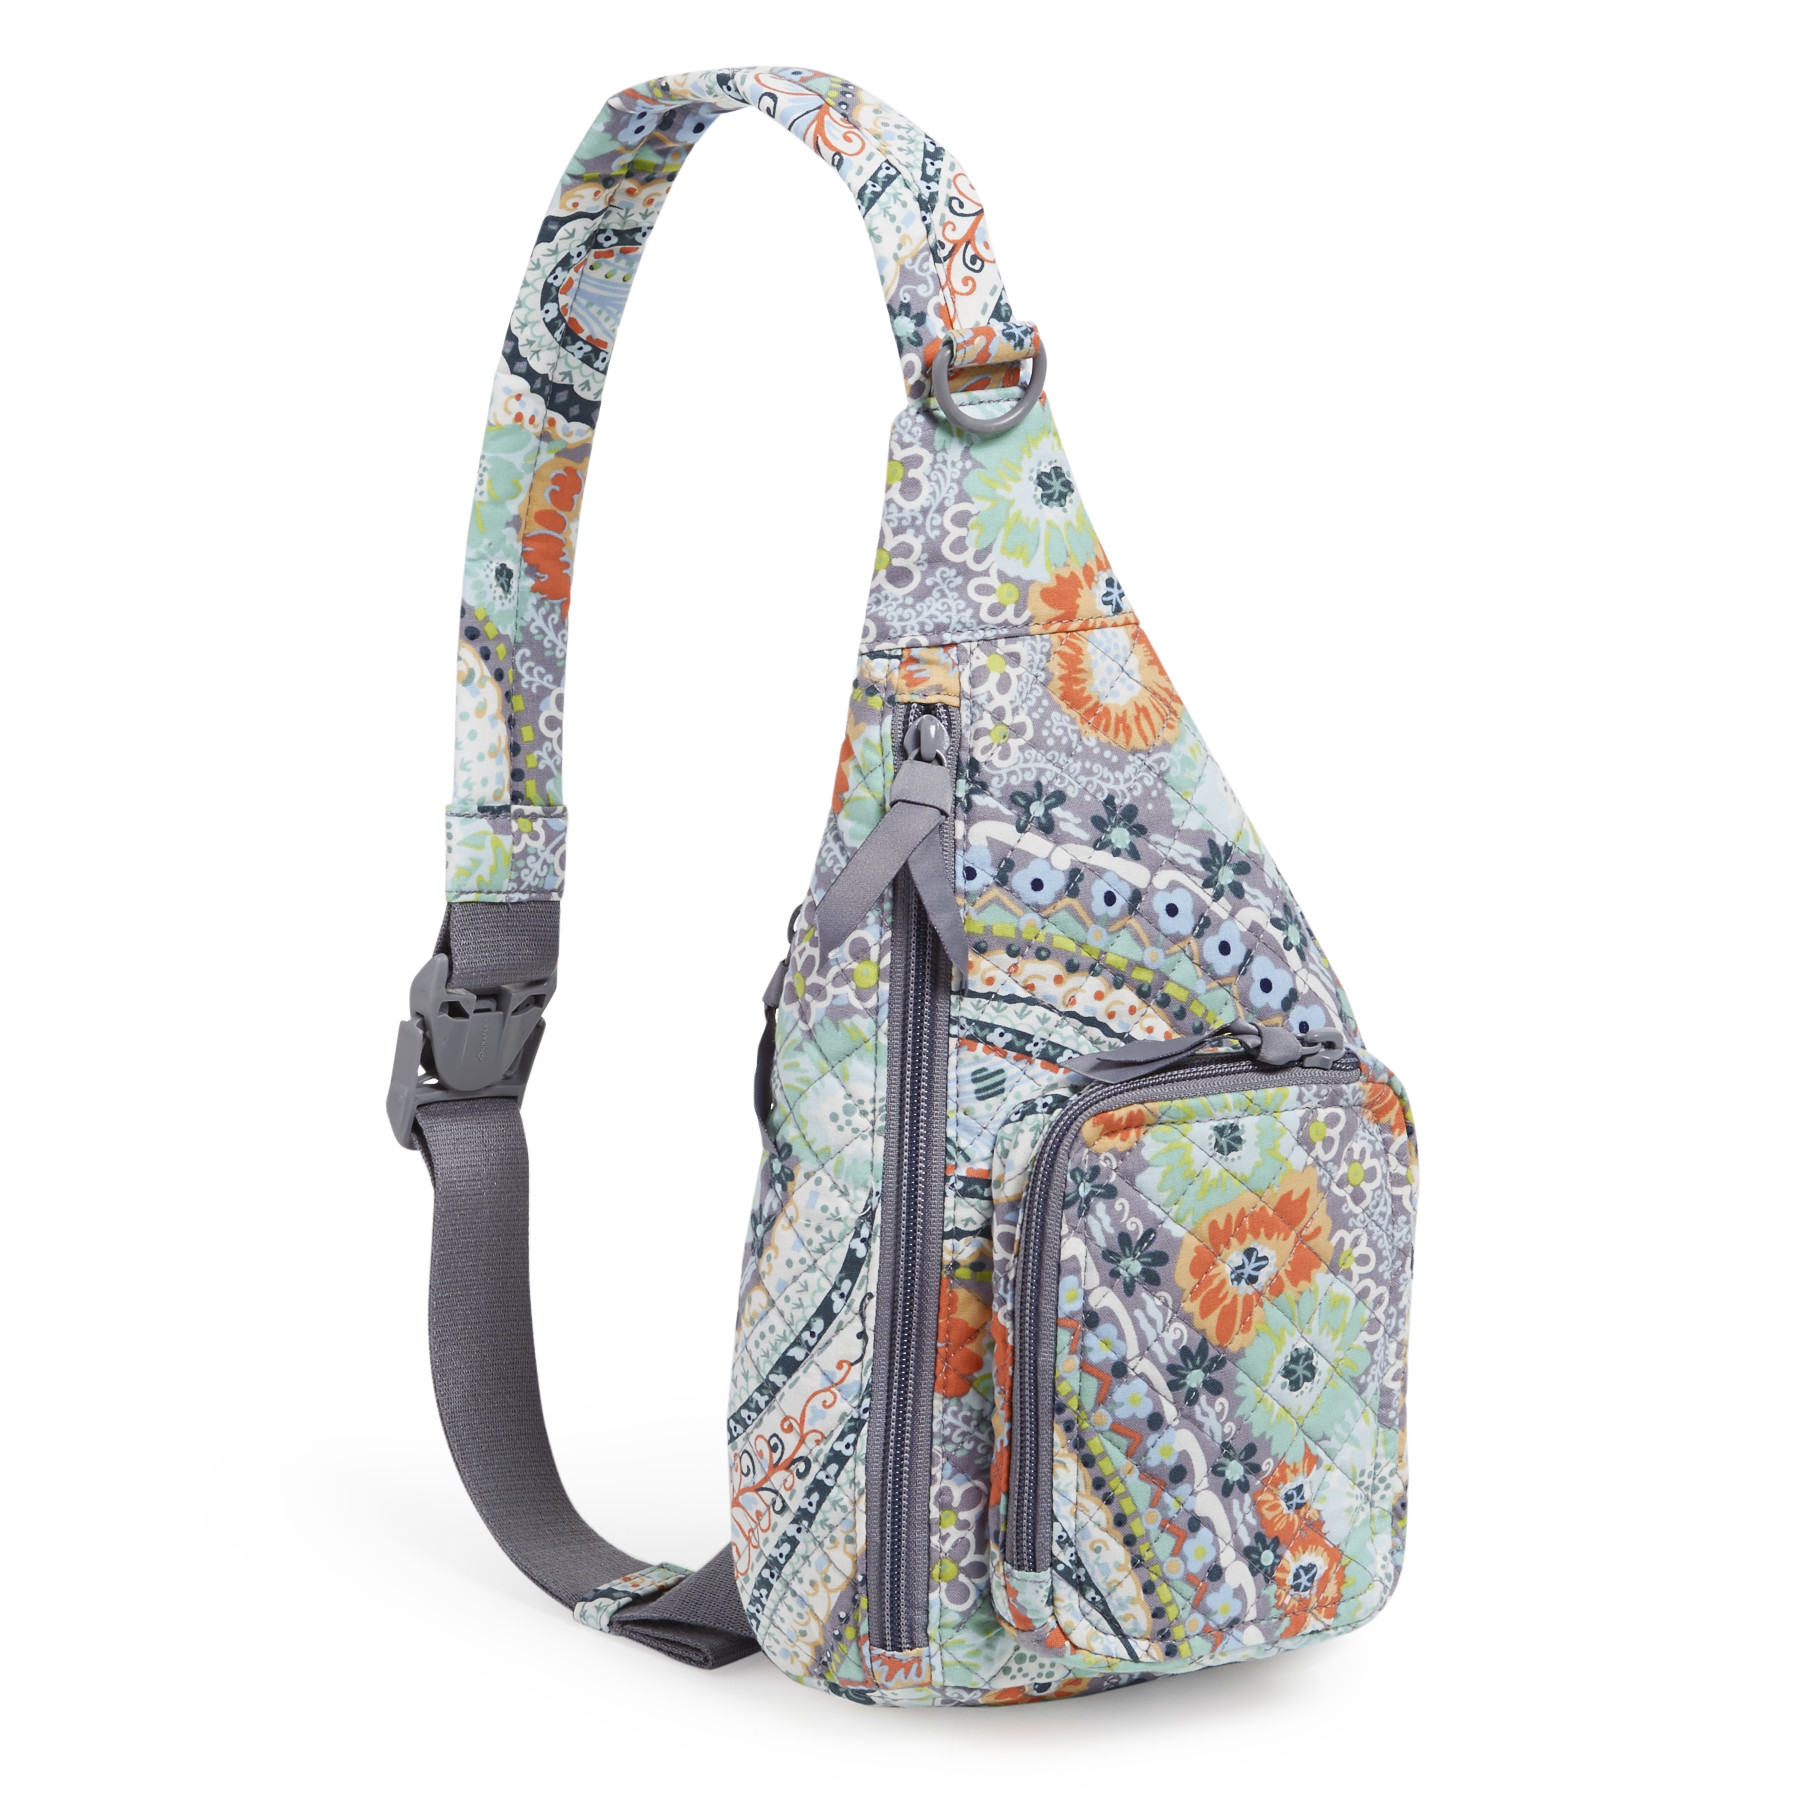 Vera Bradley Women's Recycled Cotton Mini Sling Backpack Citrus Paisley - image 2 of 8